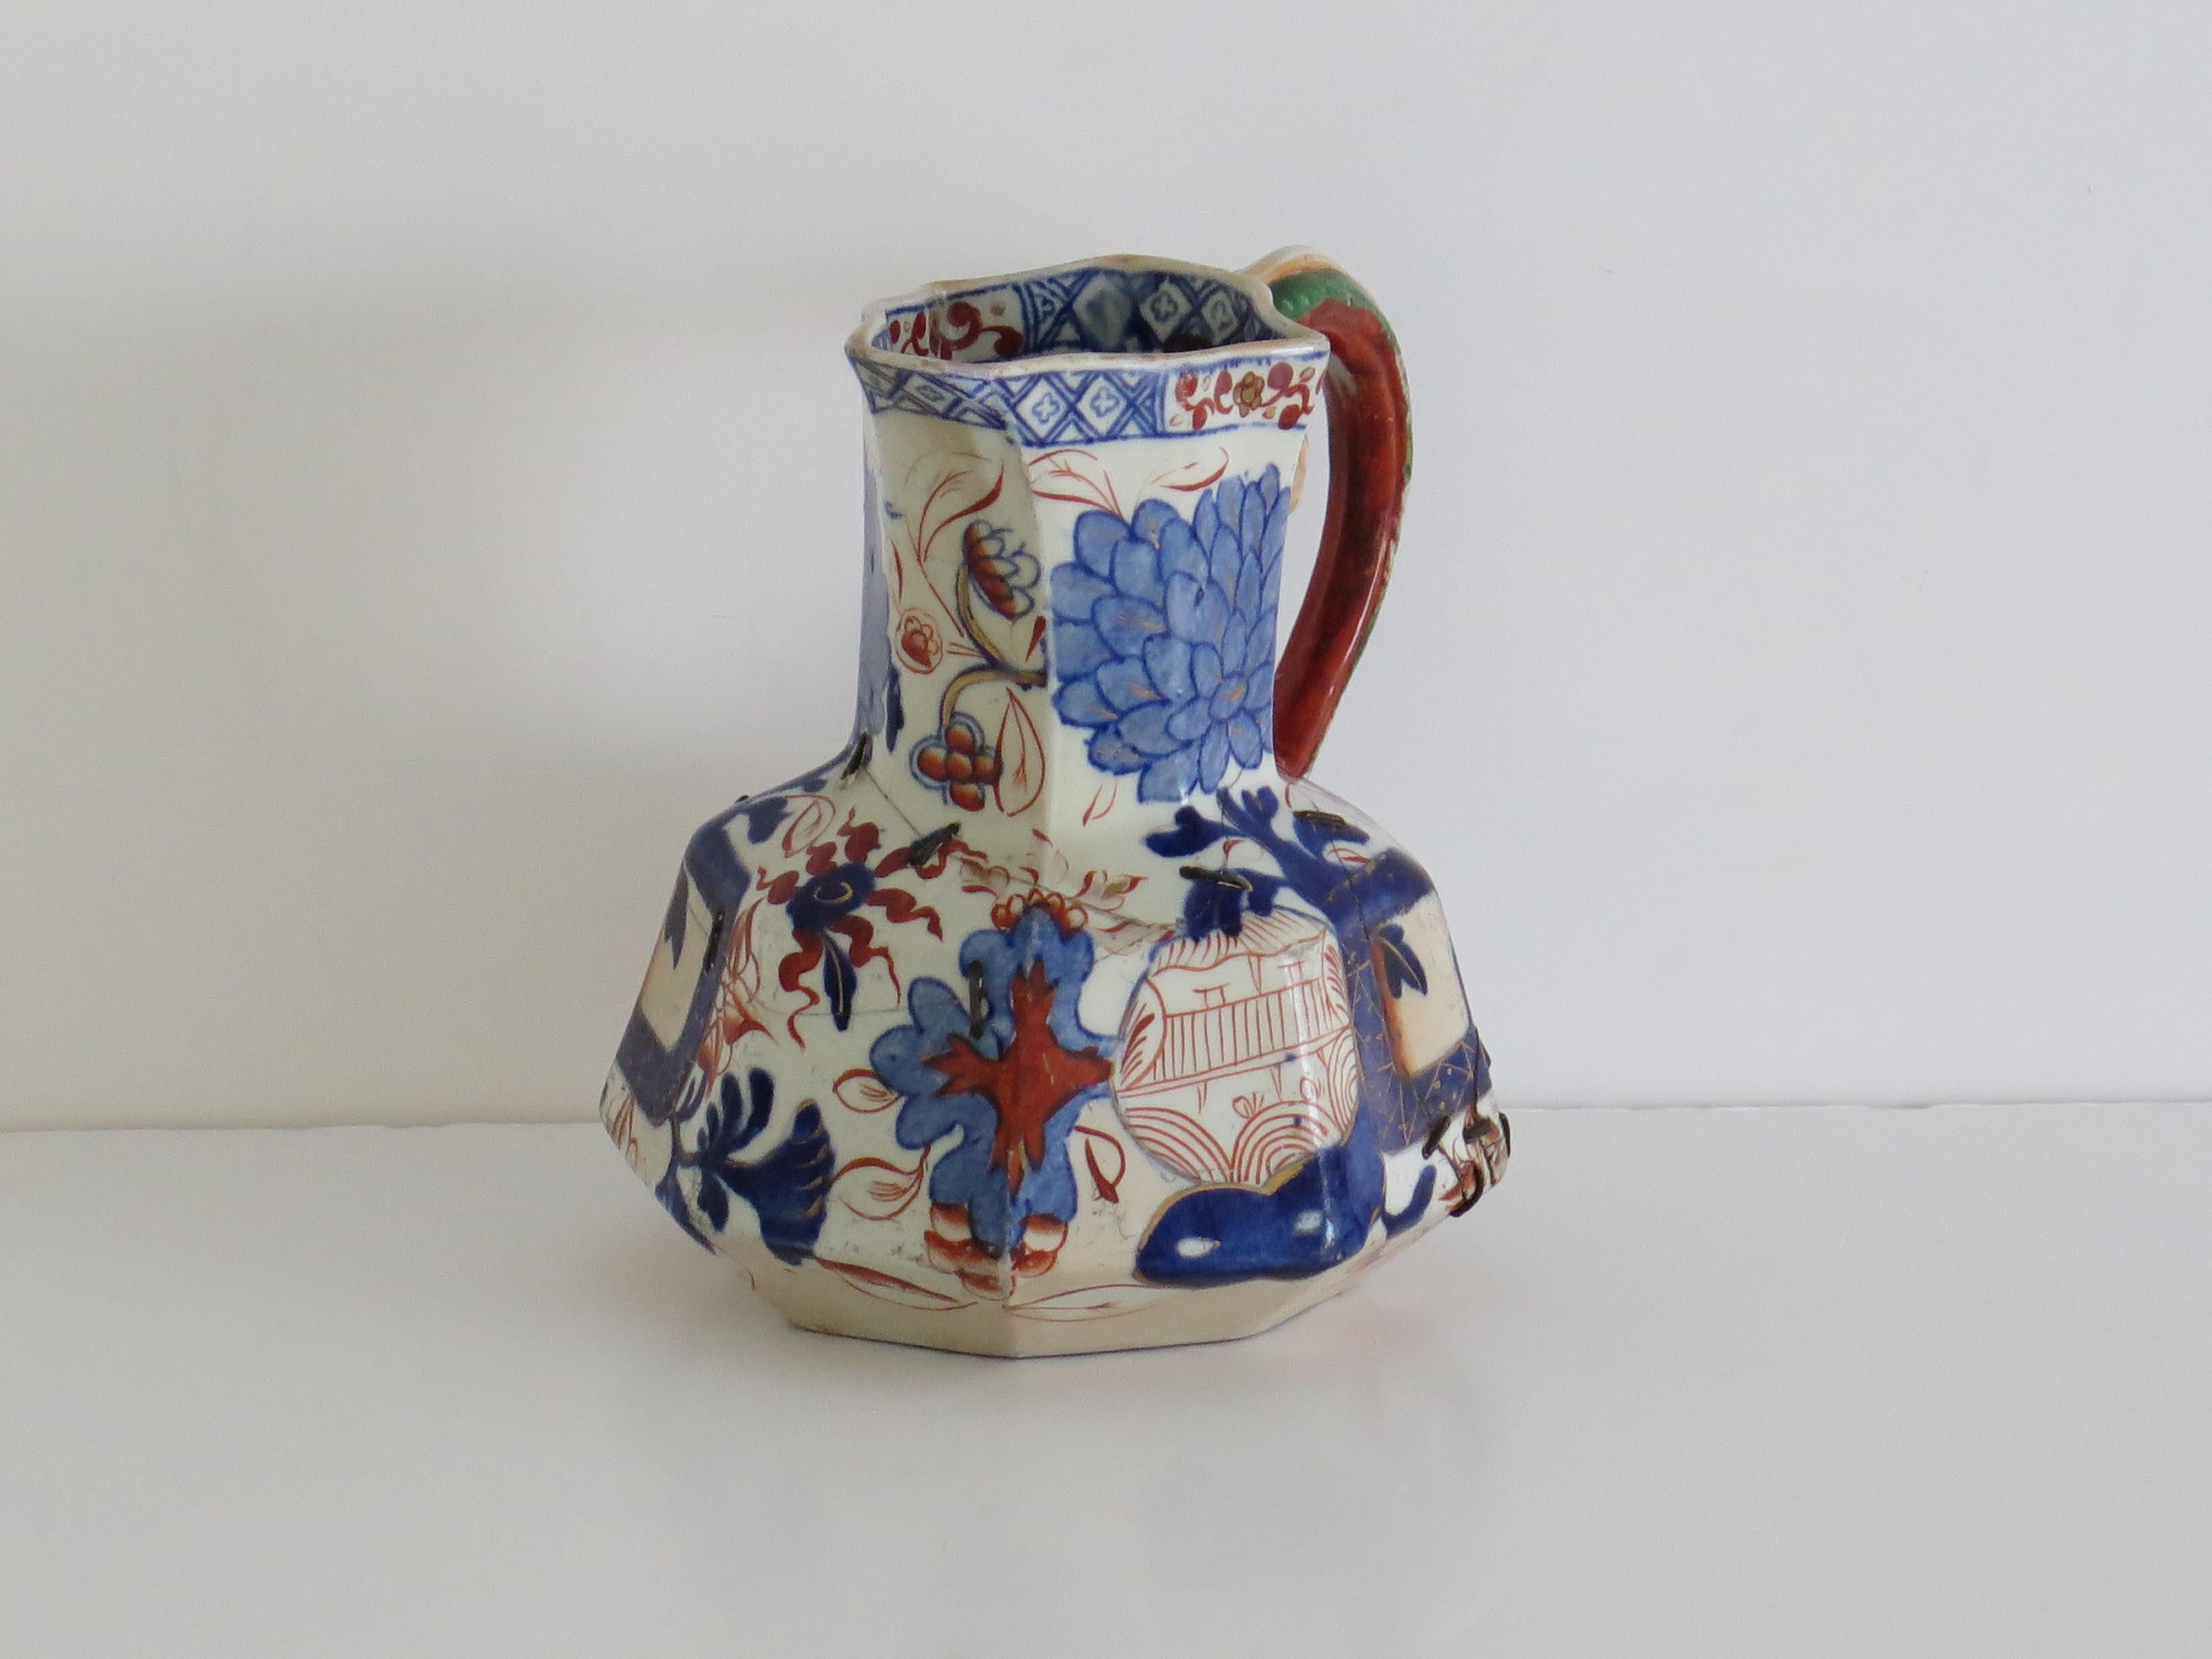 This is a mid size repaired Hydra jug or Pitcher made by the Davenport Company of Longport, Staffordshire, England in the late Georgian period, circa 1805-1820, made of Ironstone pottery, which Davenport called Stone China.

It is hand decorated